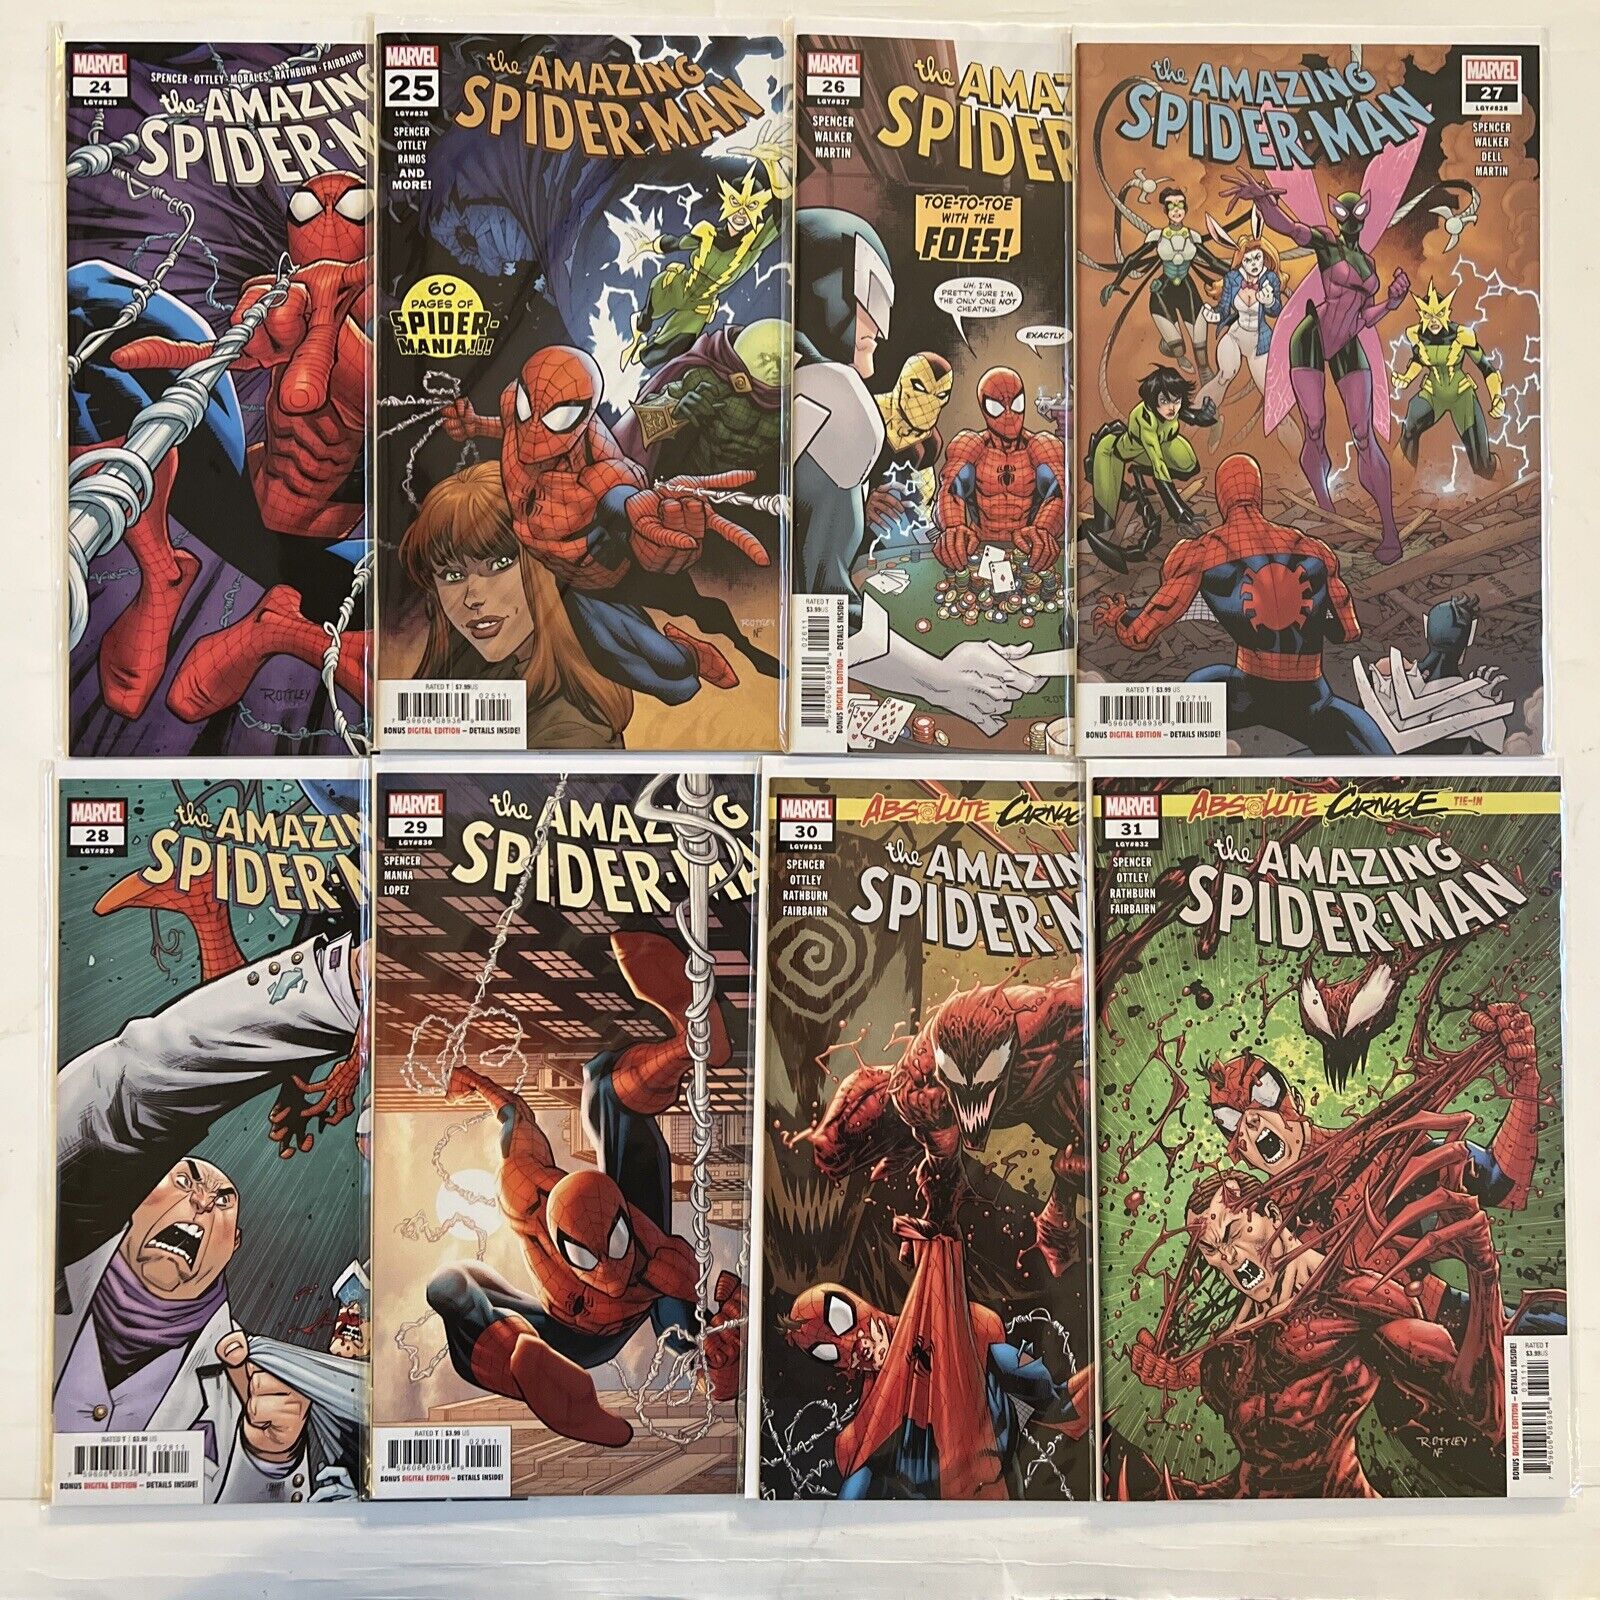 AMAZING SPIDER-MAN #24-31 Absolute Carnage Tie Ins (Vol 5) 2018 MARVEL COMICS